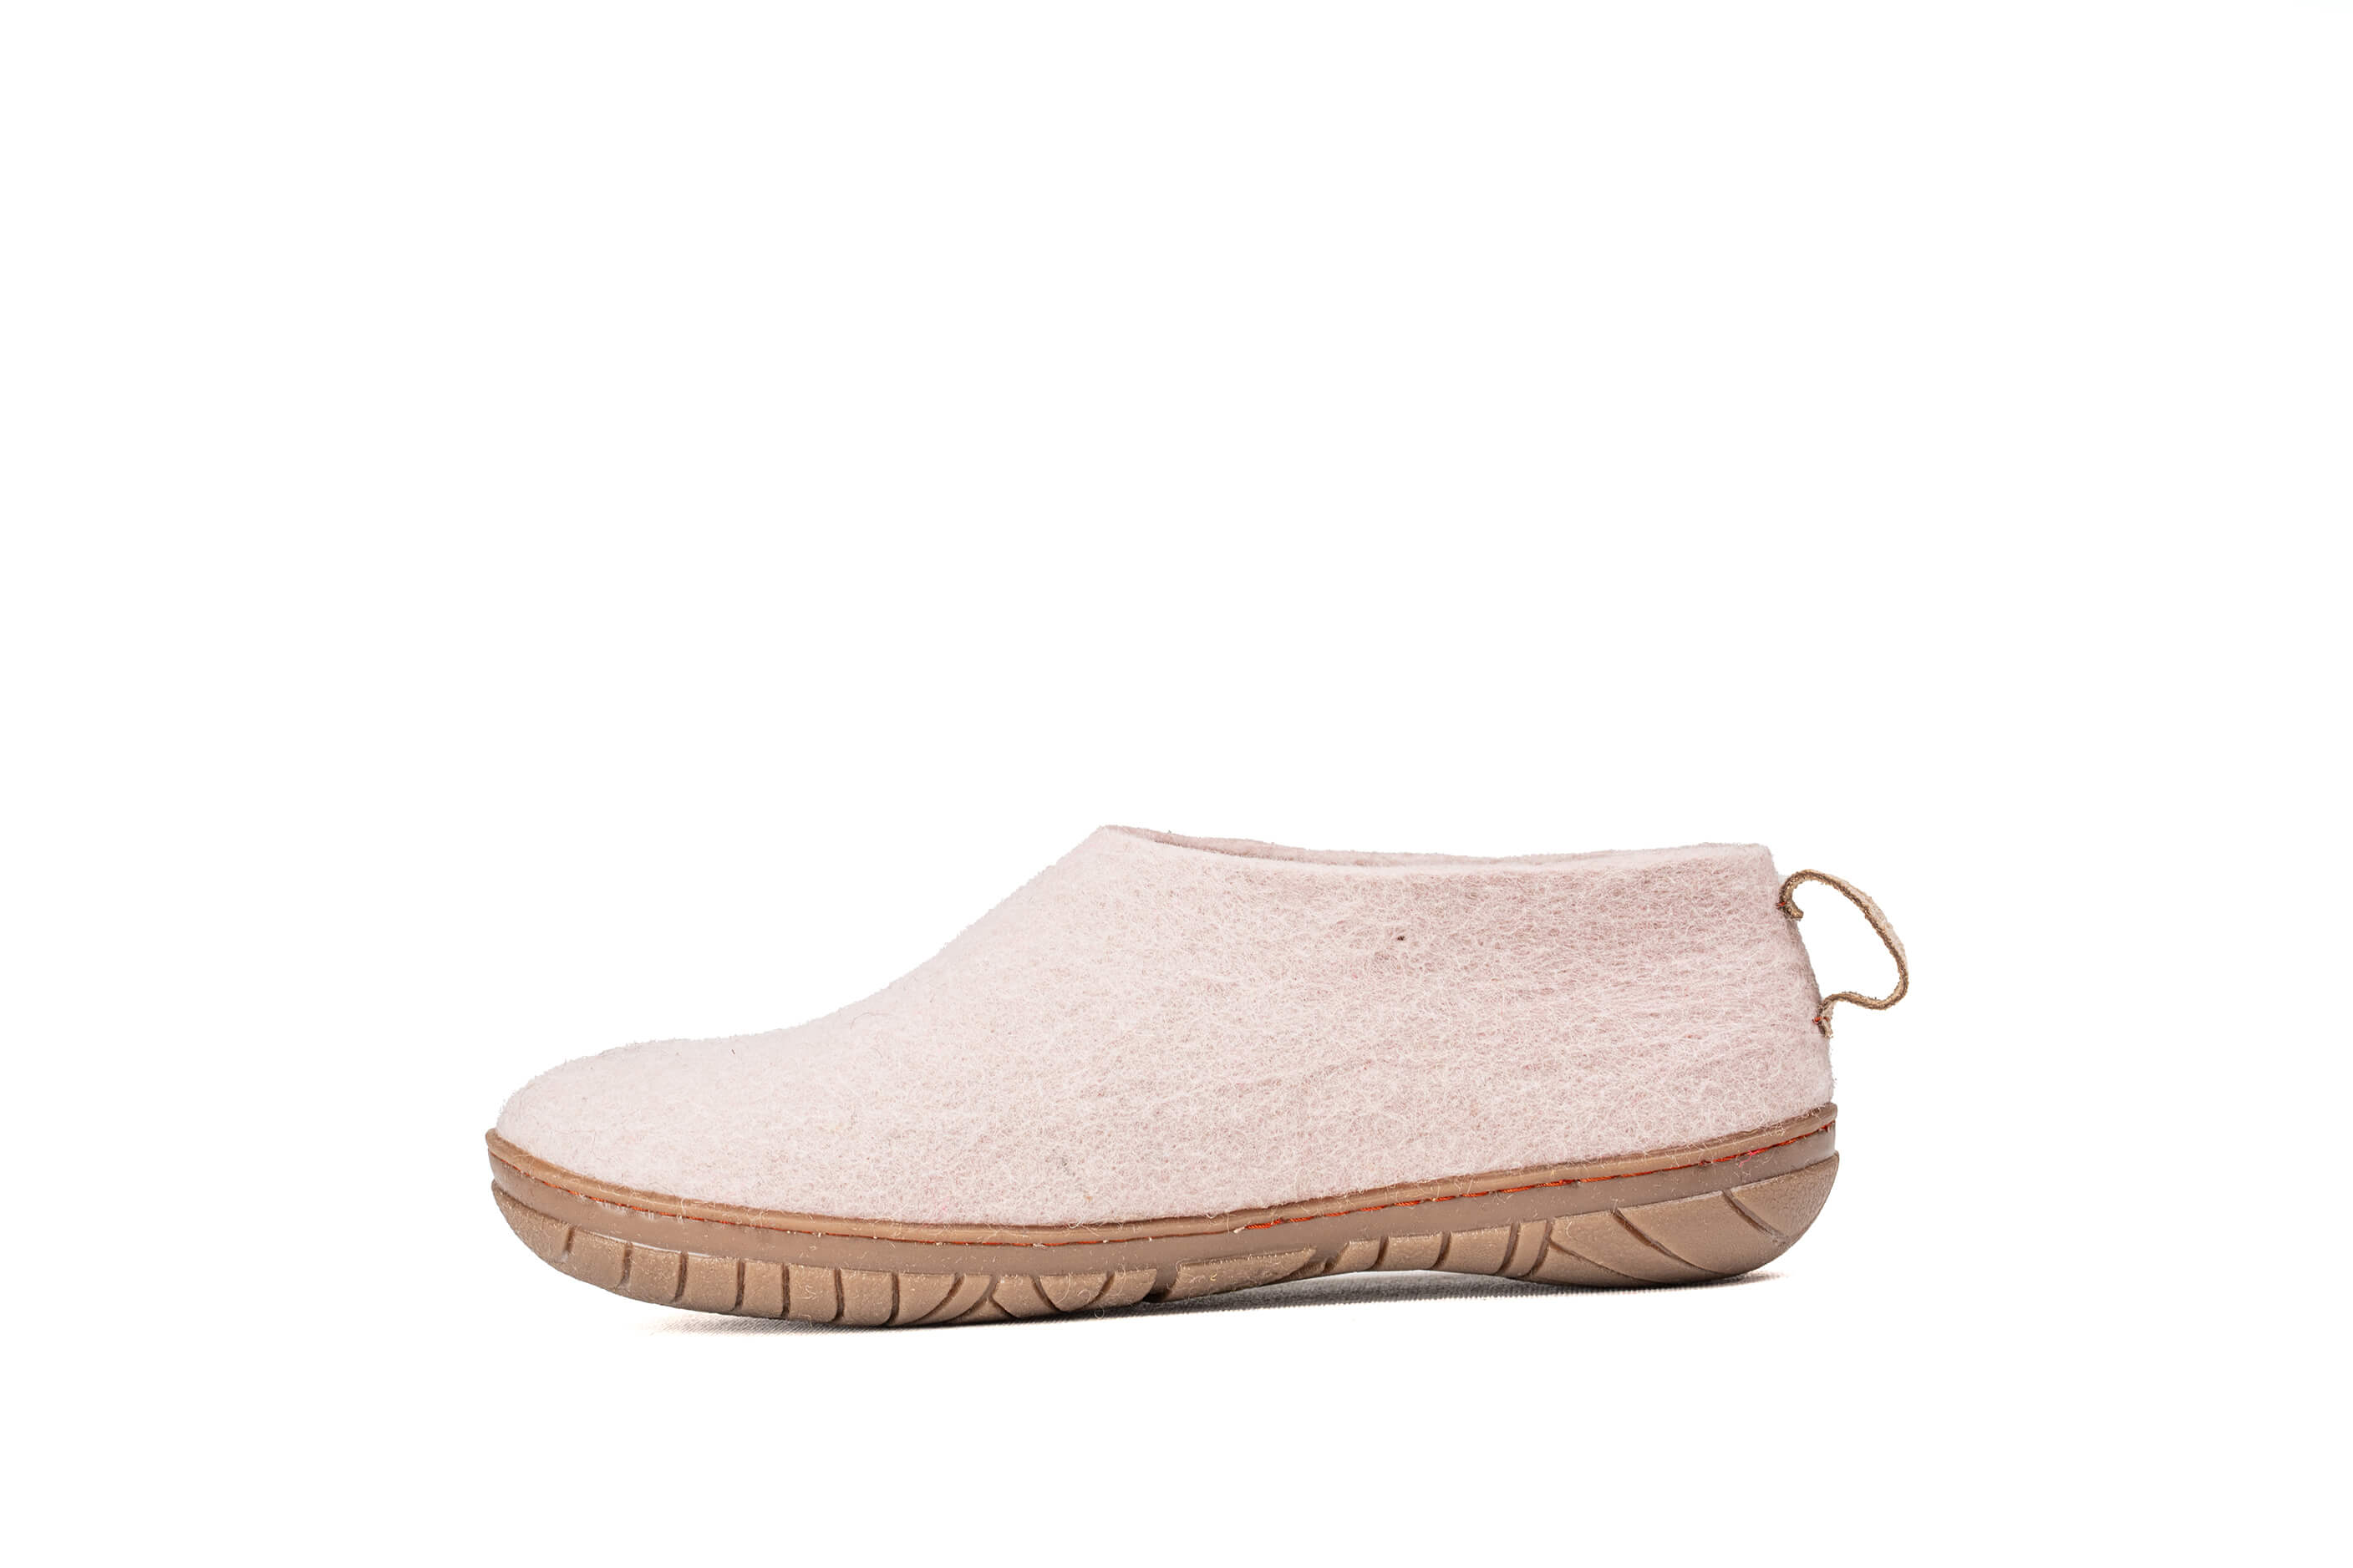 Outdoor Shoes With Rubber Sole - Baby Pink